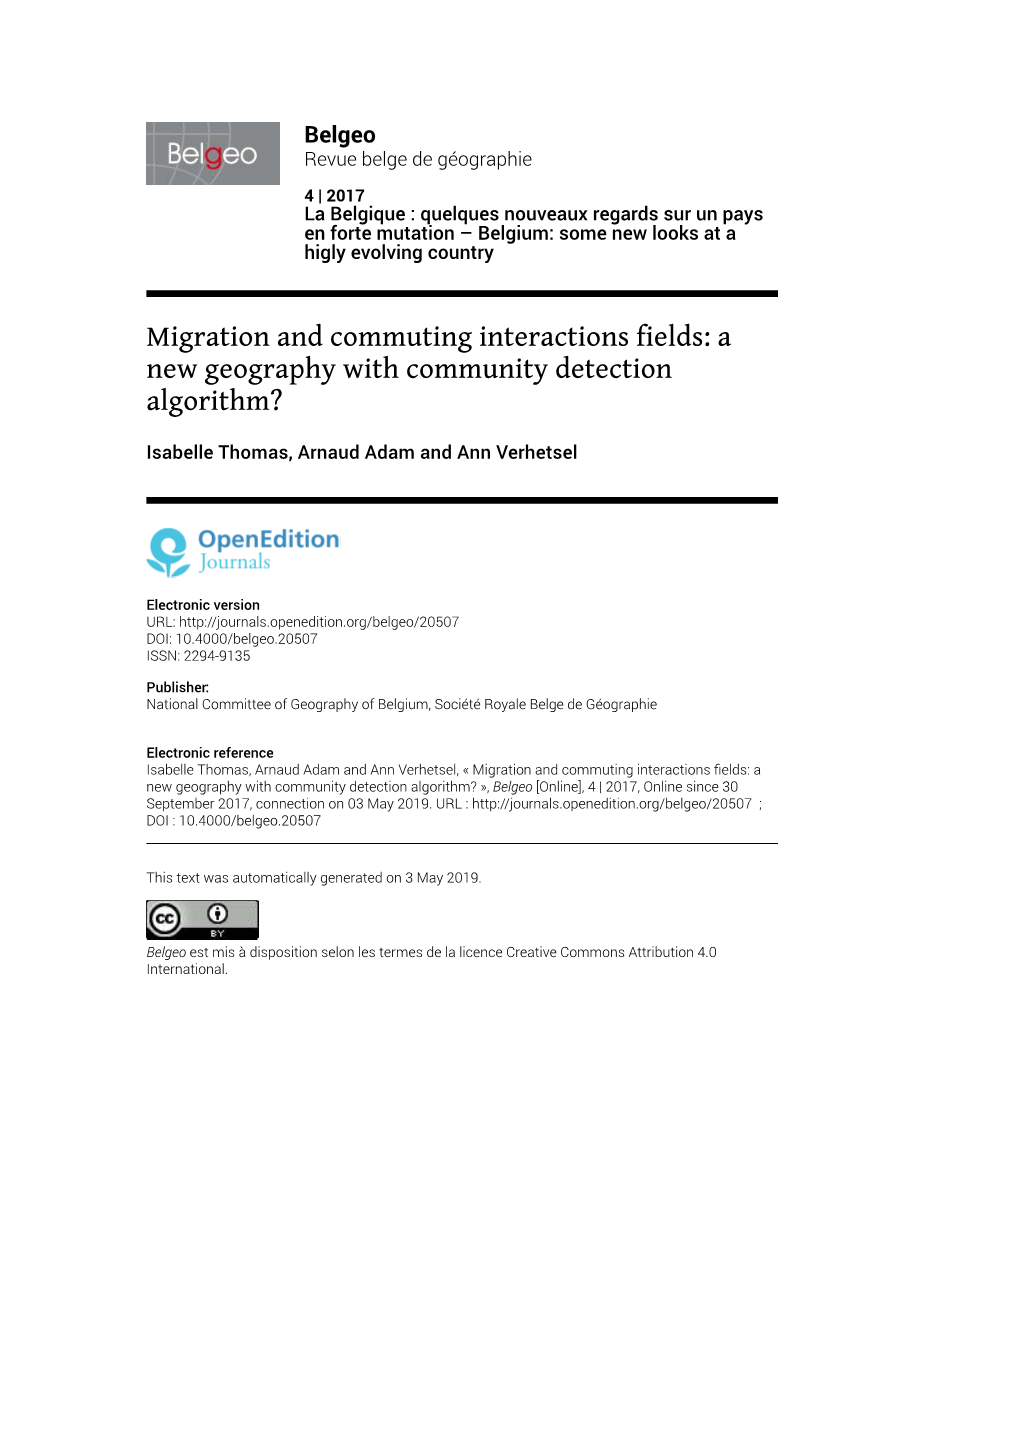 Migration and Commuting Interactions Fields: a New Geography with Community Detection Algorithm?